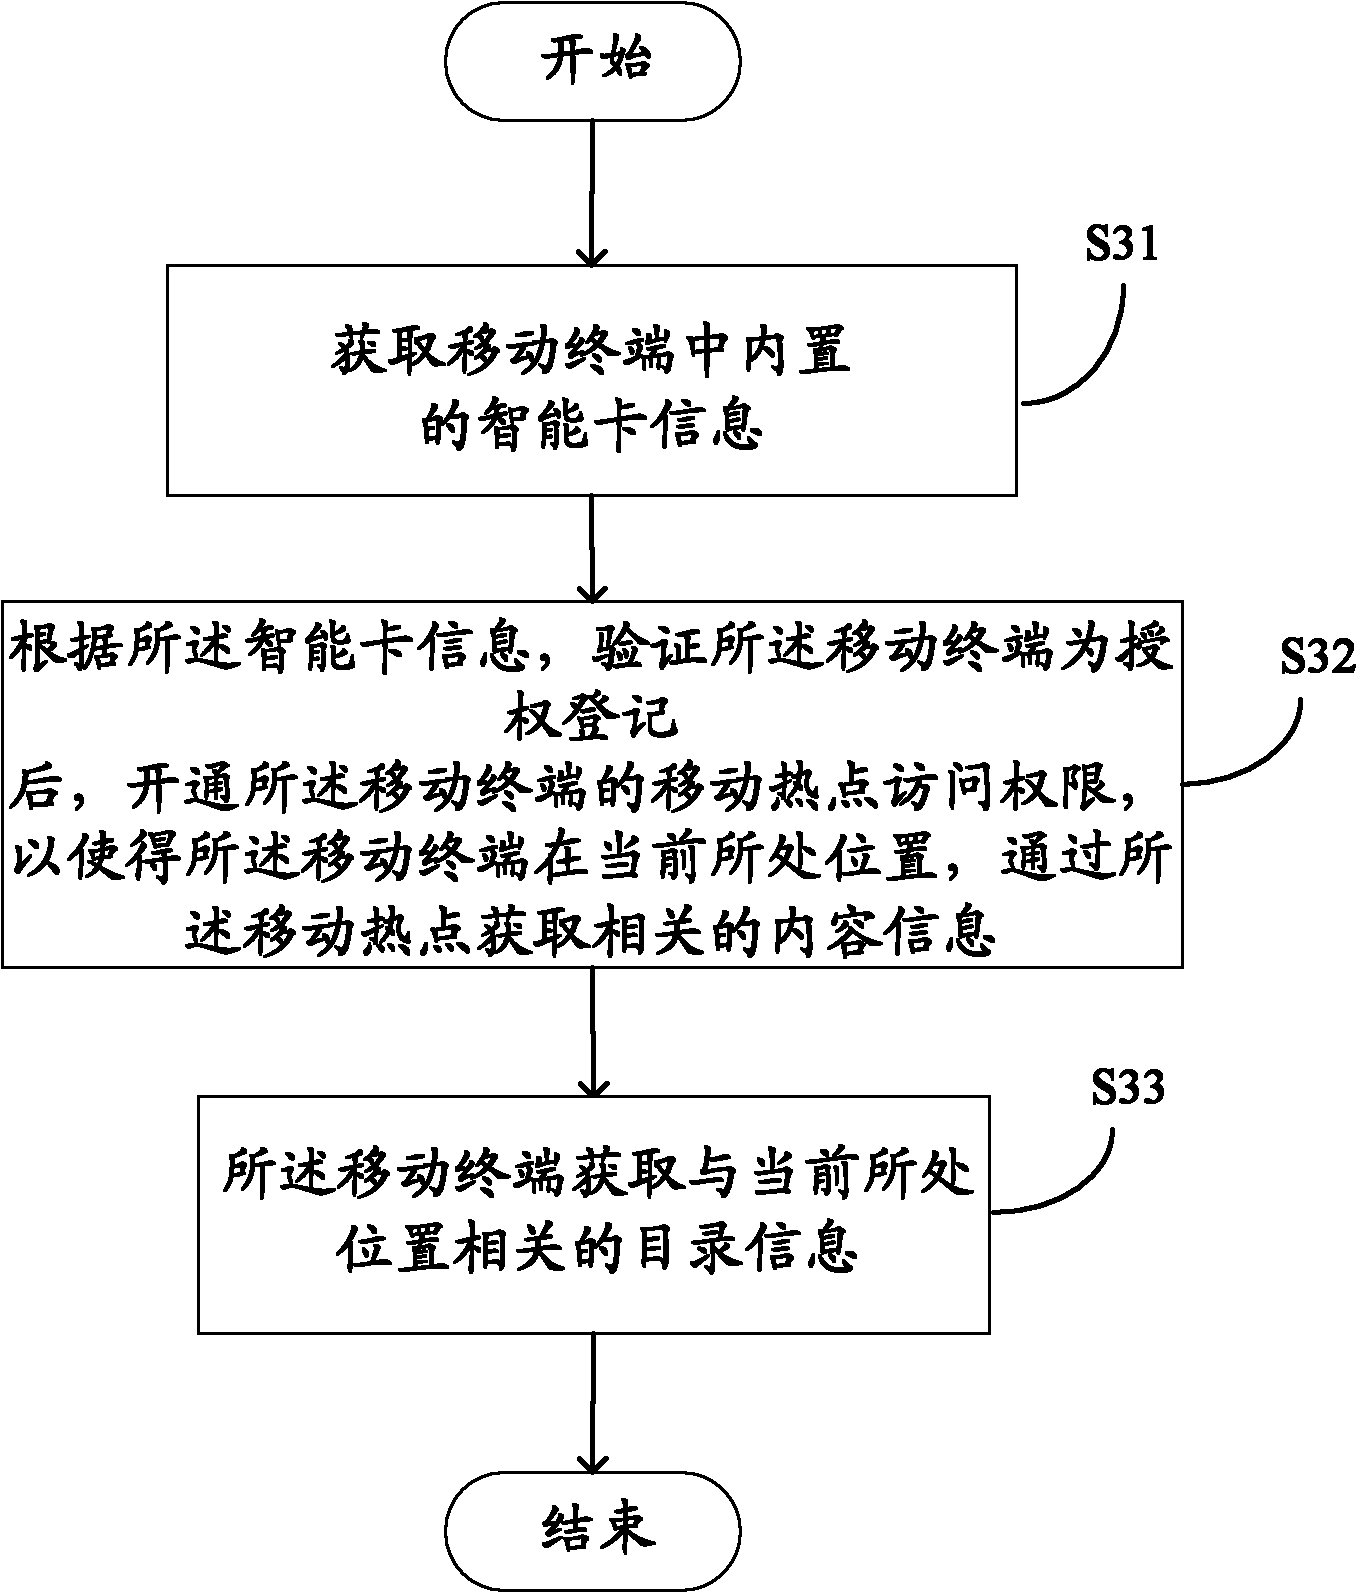 Method for acquiring information from mobile communication and mobile communication system